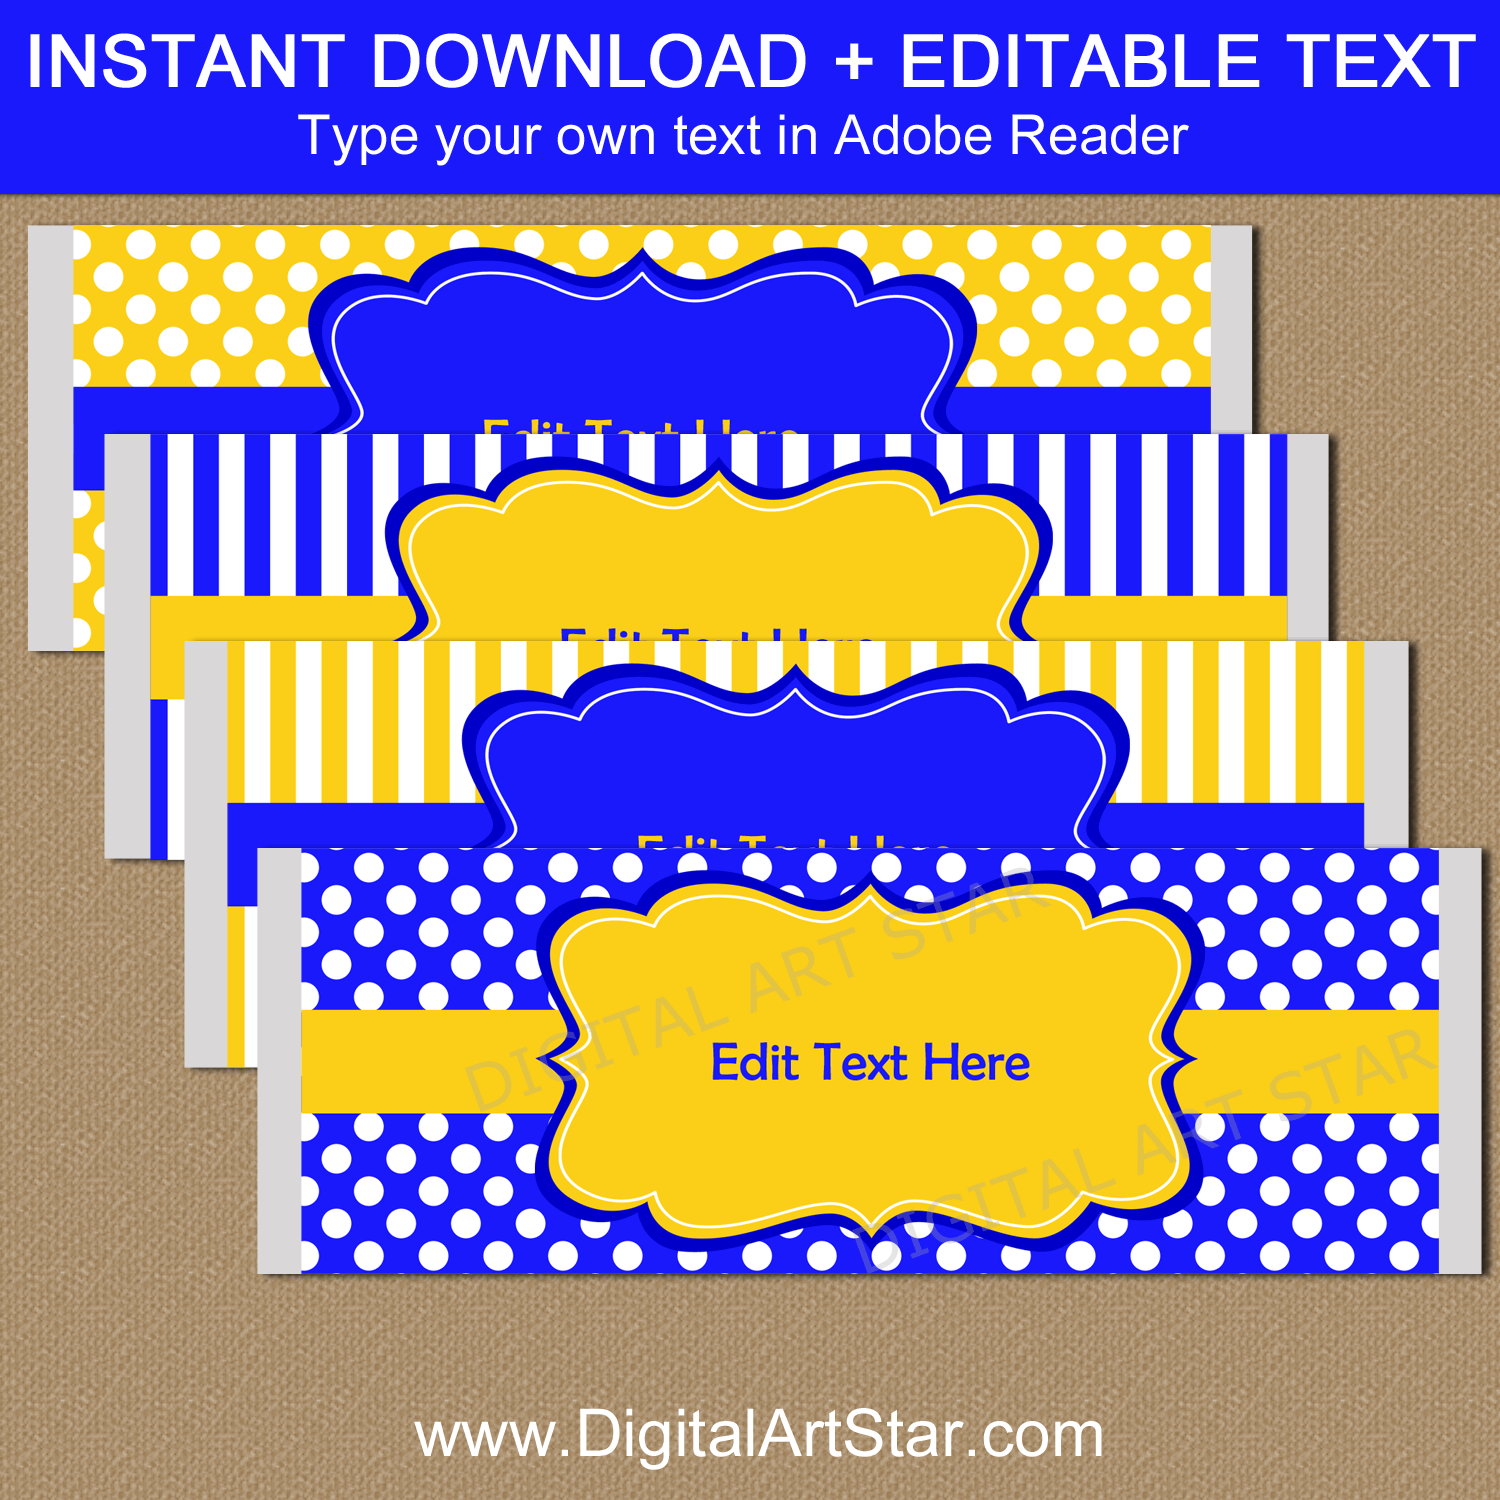 Royal Blue and Yellow Candy Wrappers Editable Template